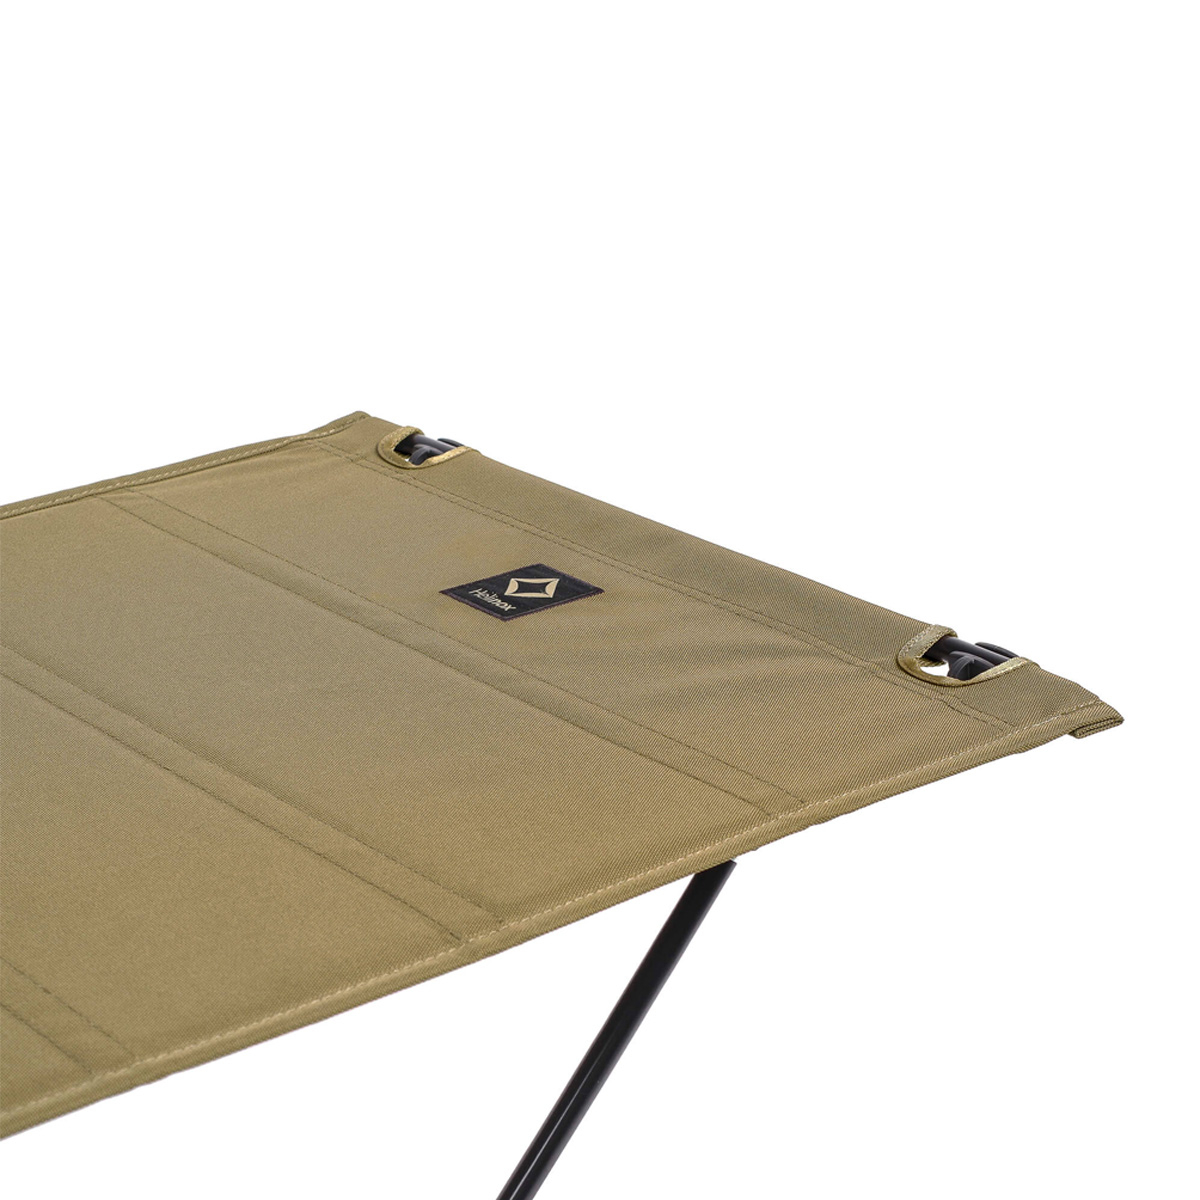 Helinox Tactical Table Regular Coyote Tan fabric, bluesign®-certified and recycled 600D polyester